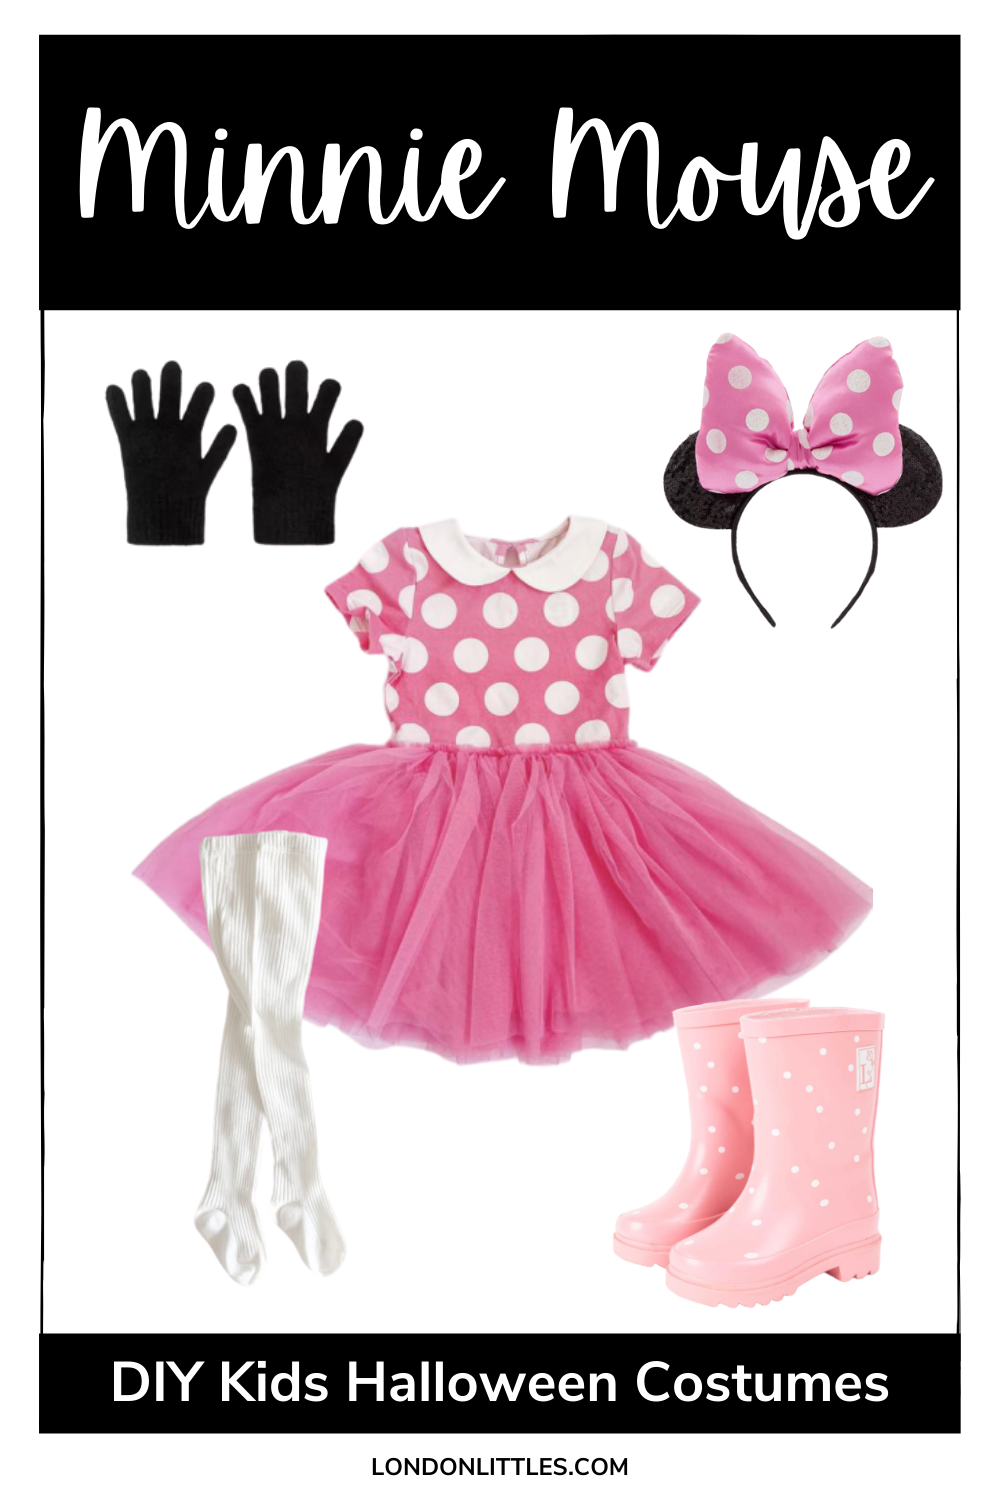 diy kids halloween costumes minnie mouse